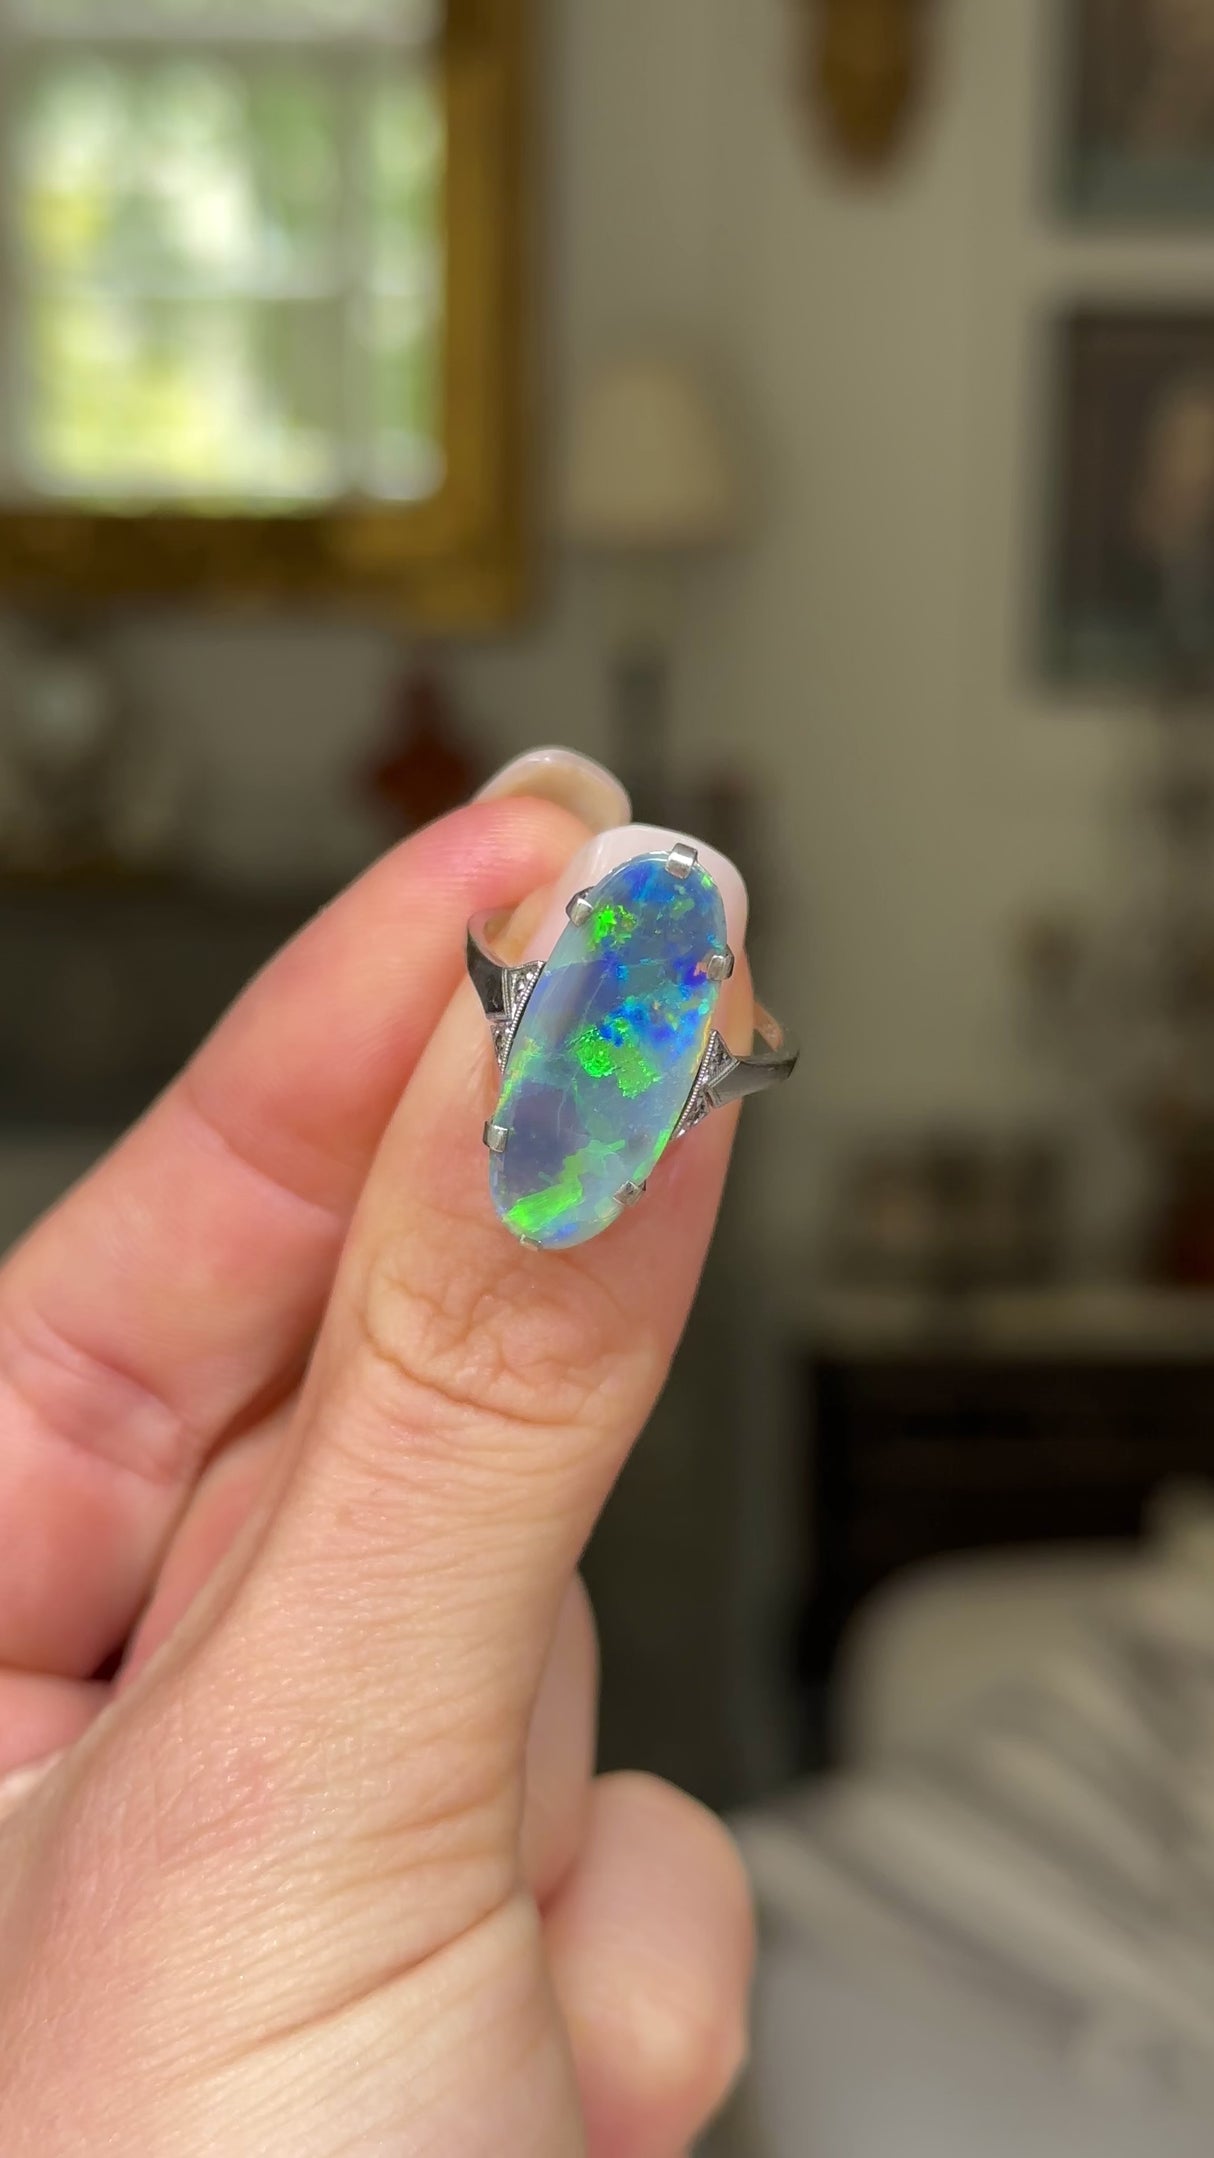 Antique, Edwardian, Opal Cocktail Ring, 18ct White Gold